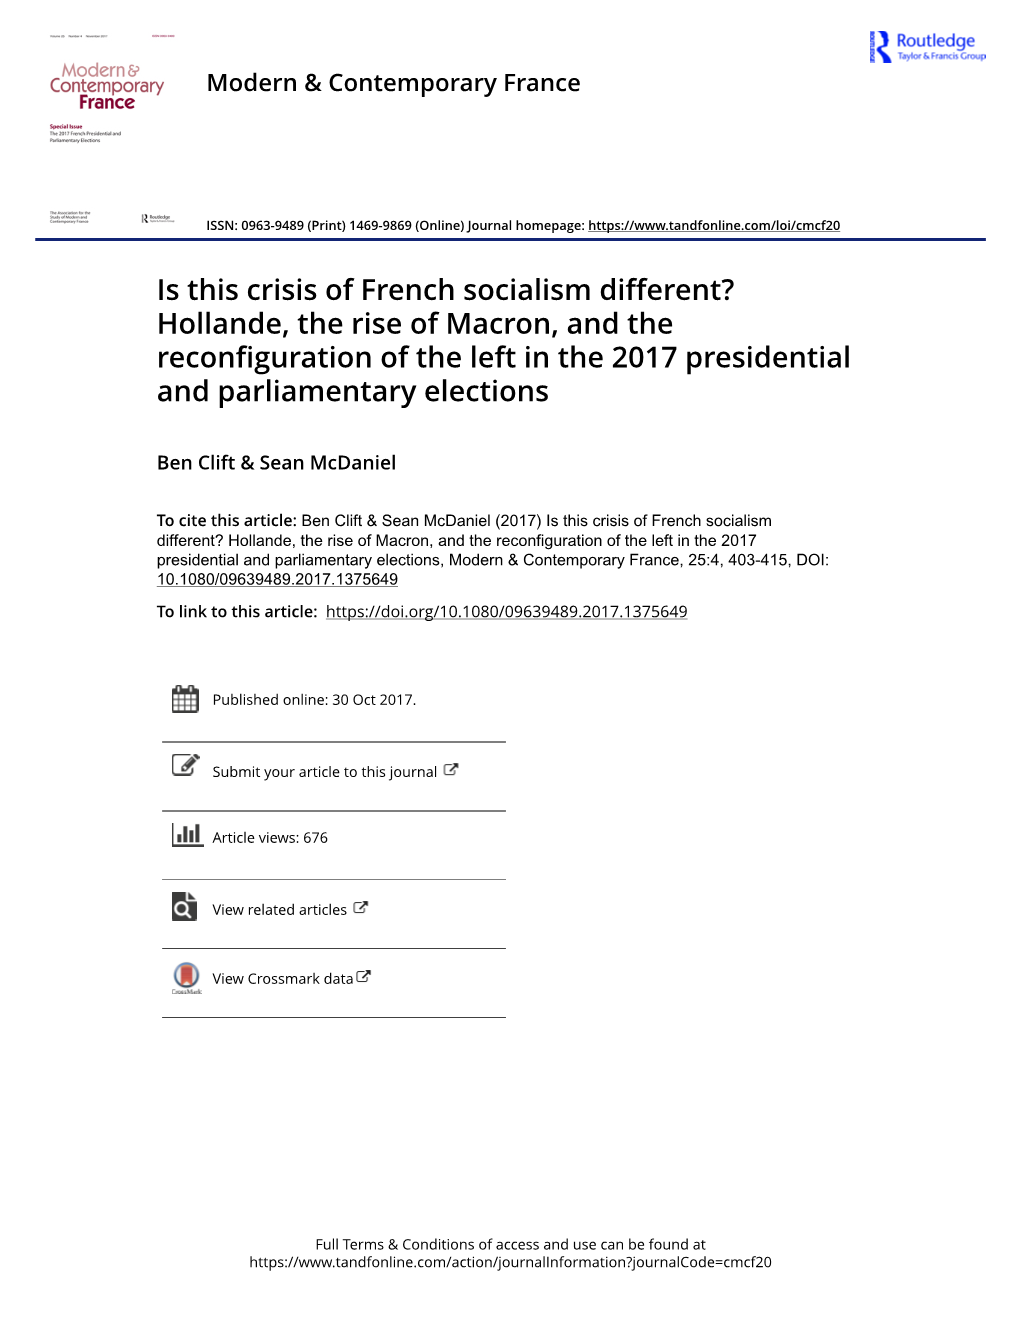 Is This Crisis of French Socialism Different? Hollande, the Rise of Macron, and the Reconfiguration of the Left in the 2017 Presidential and Parliamentary Elections